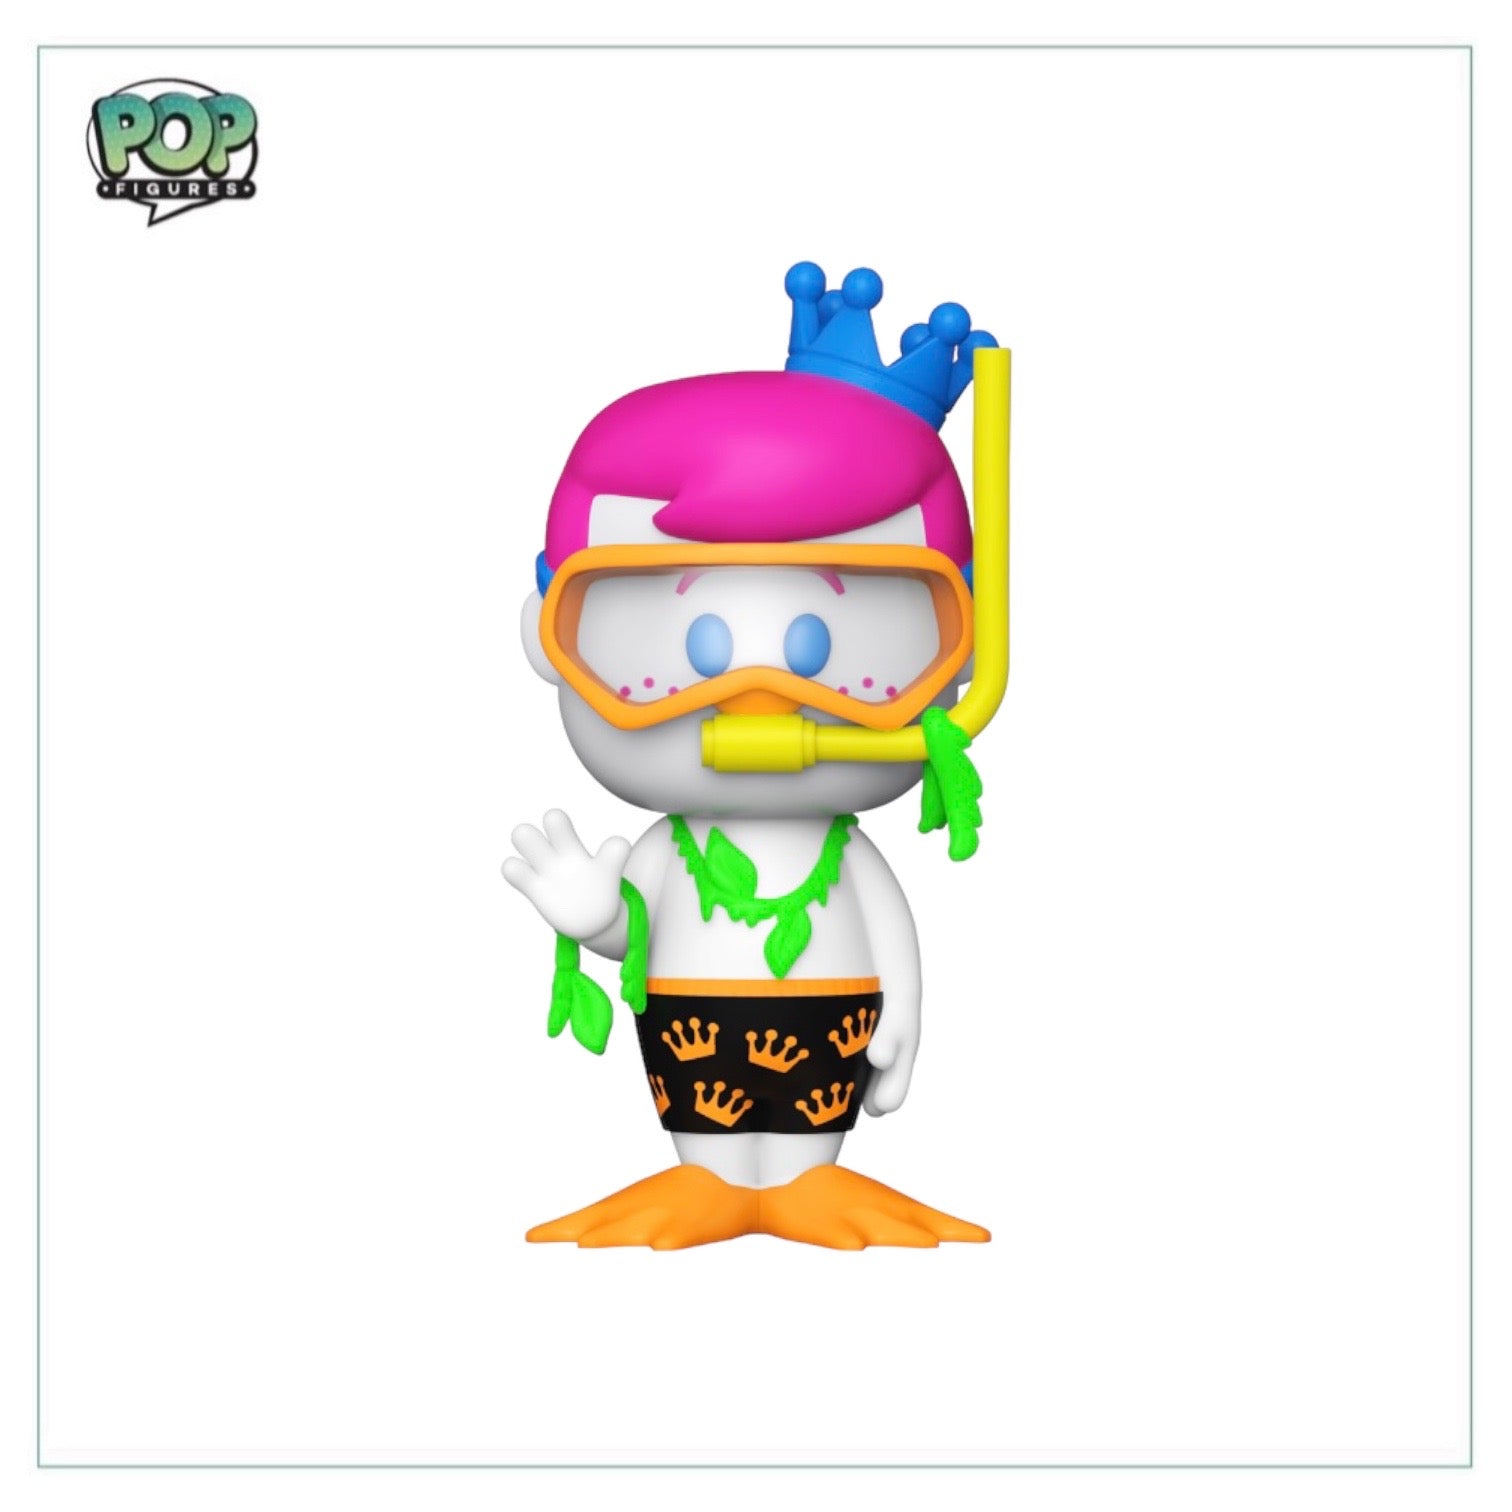 Snorkel Freddy Funko Soda Vinyl Figure! - SDCC 2023 Shared Exclusive LE13000 Pcs - Chance of Chase